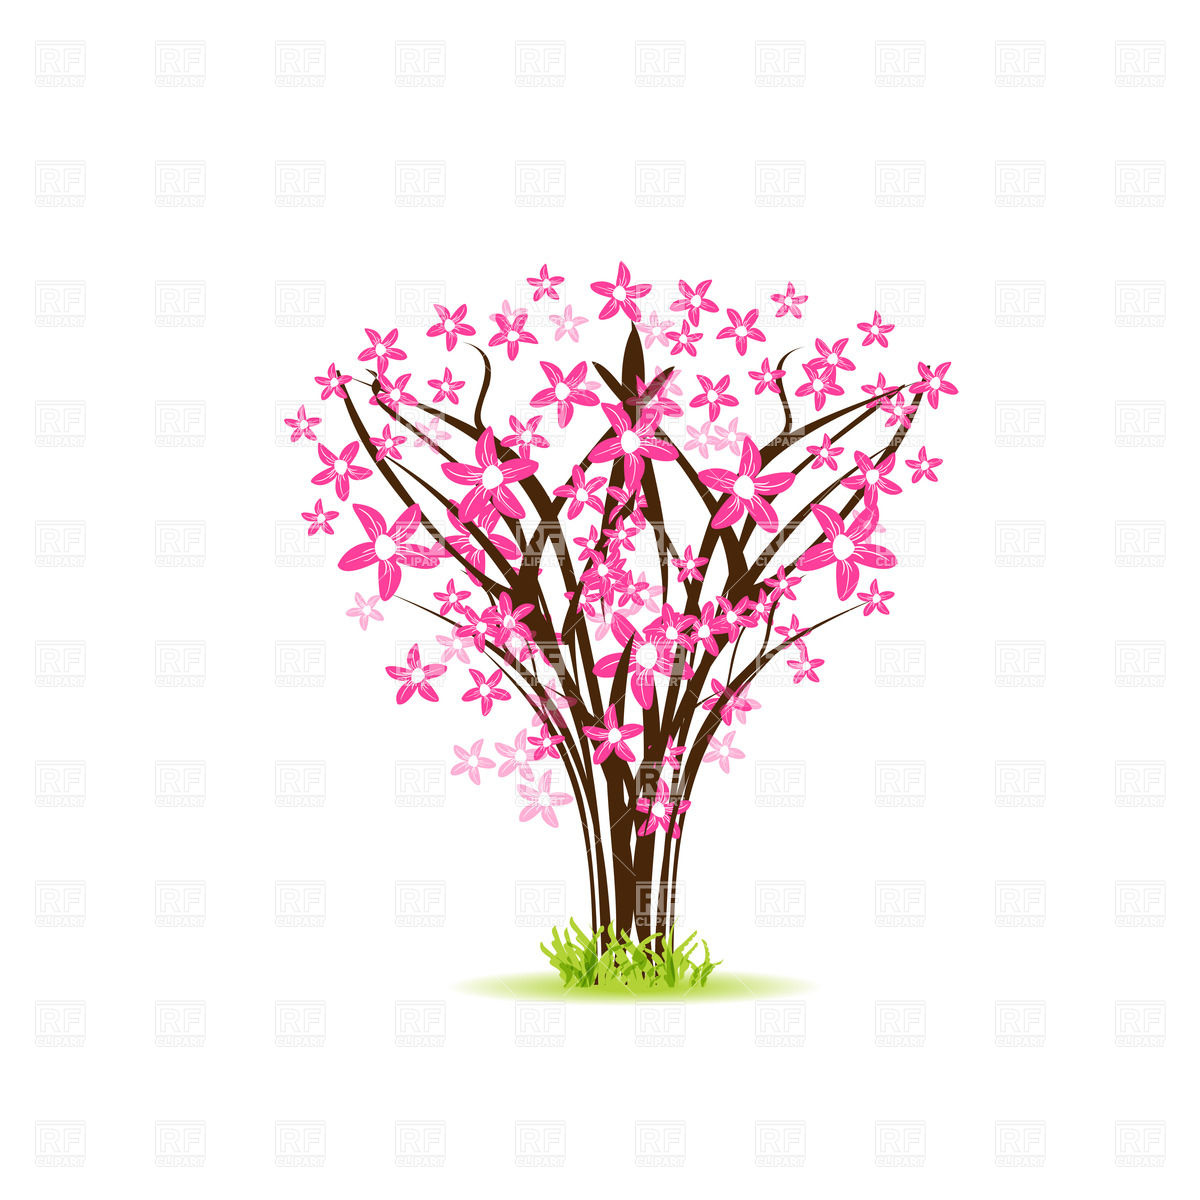 Spring flowers shrub clipart 20 free Cliparts | Download images on